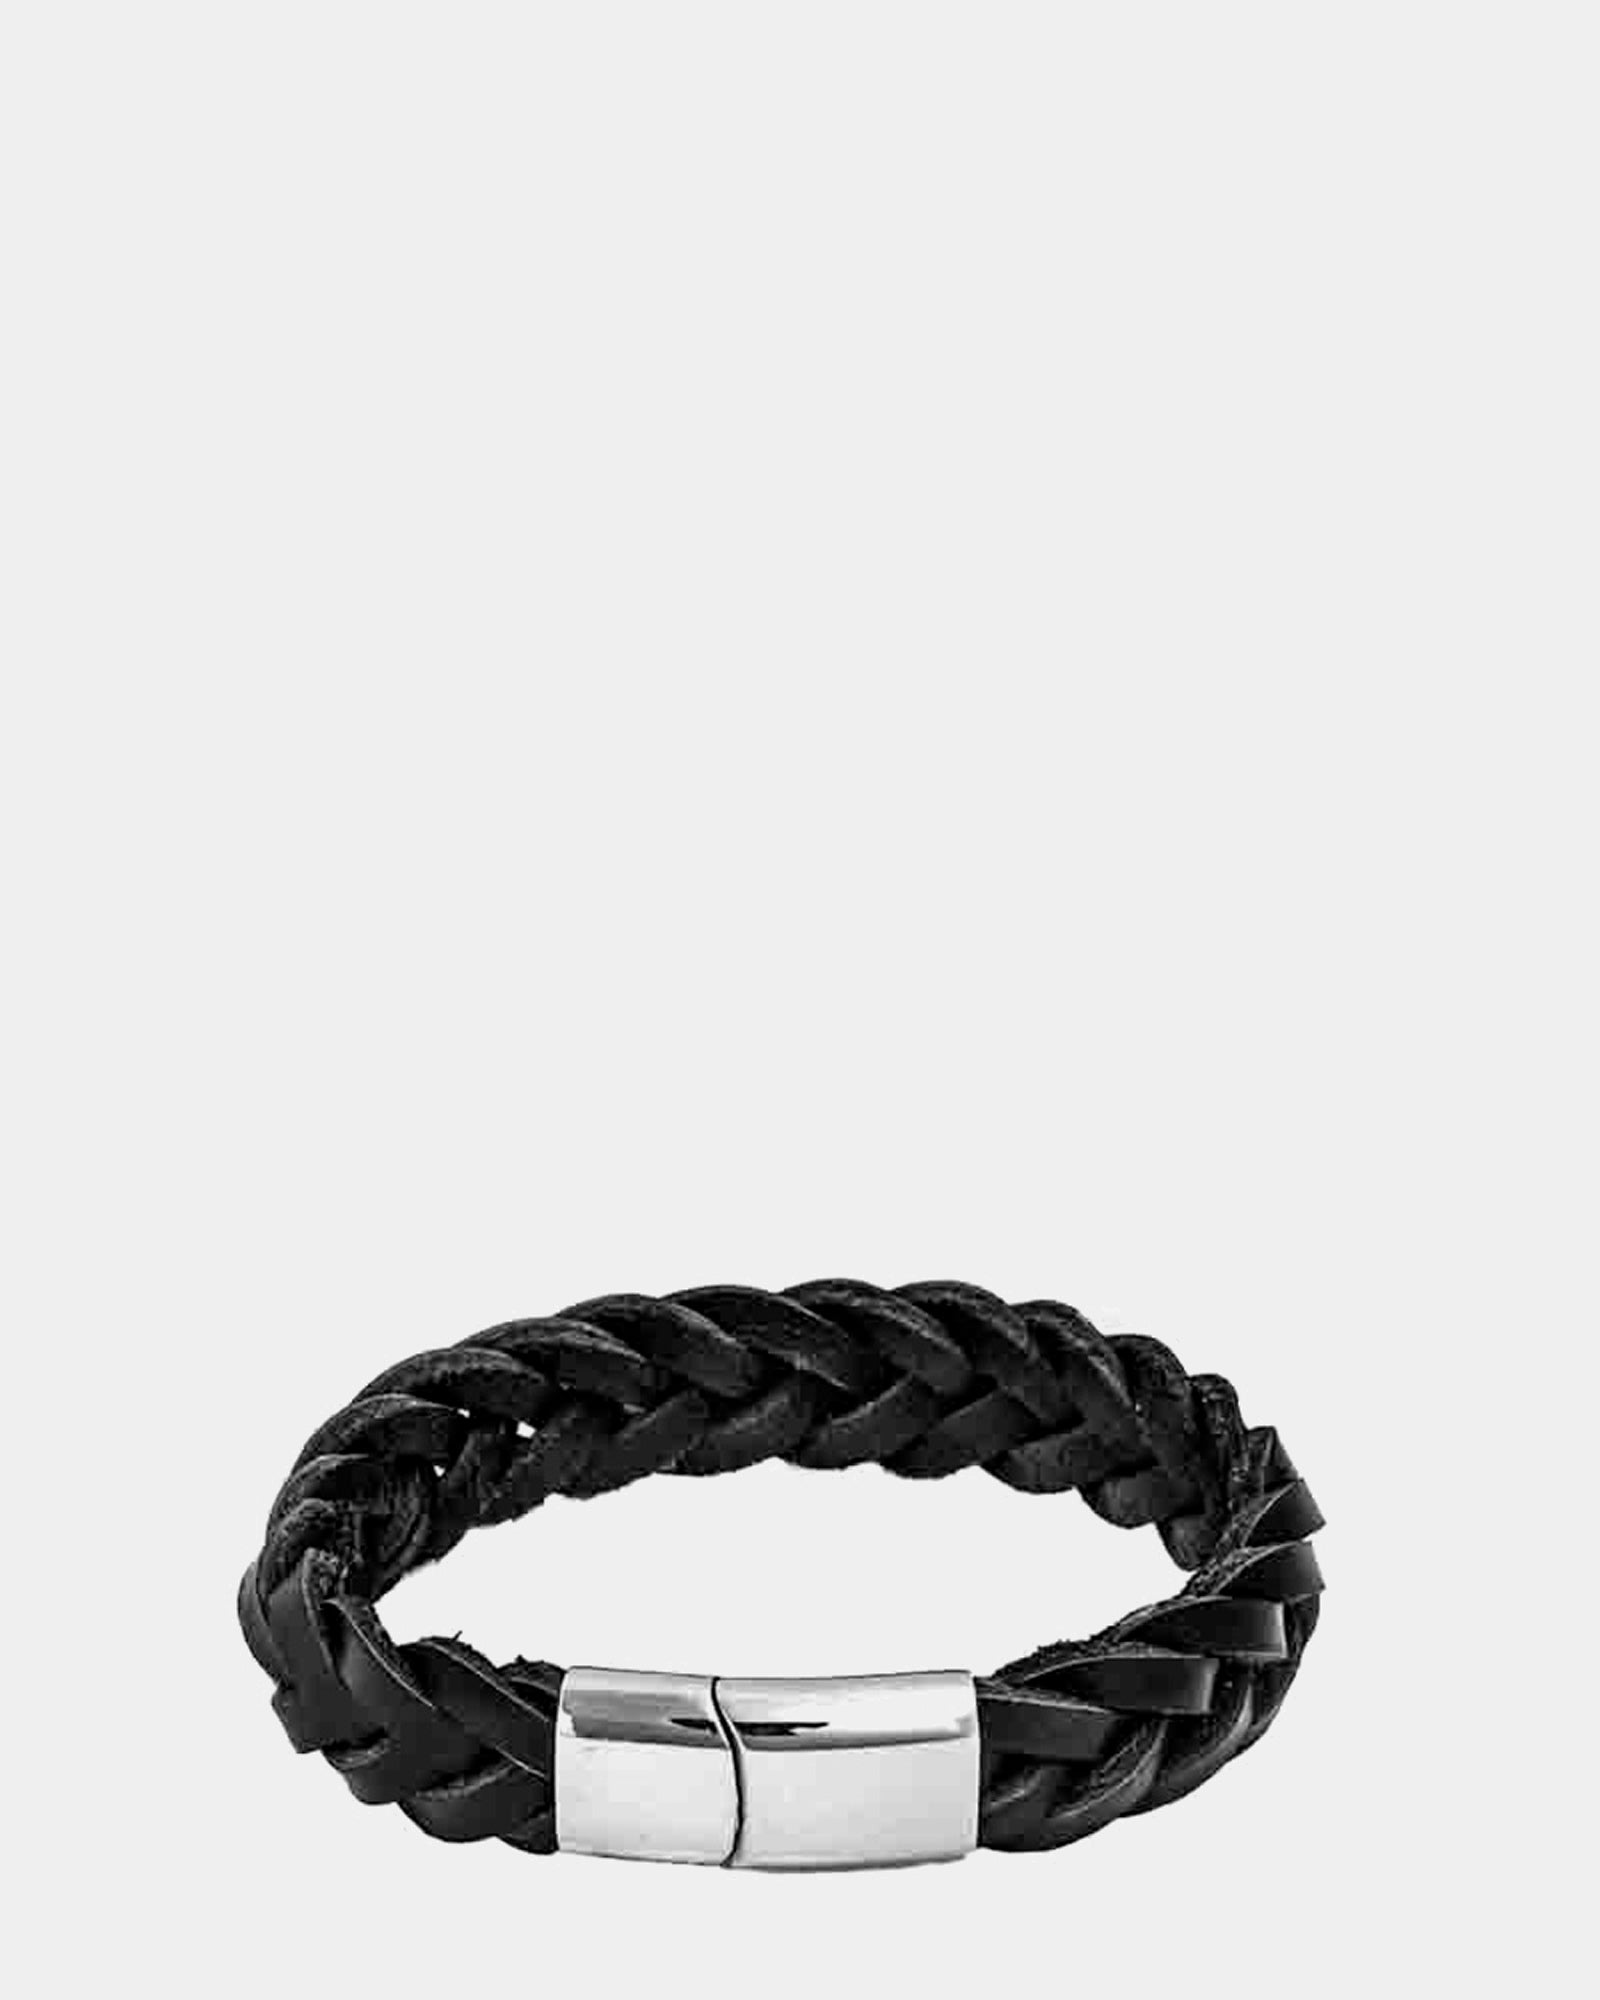 Men's Jewelry: Bracelets and Necklaces | American Eagle